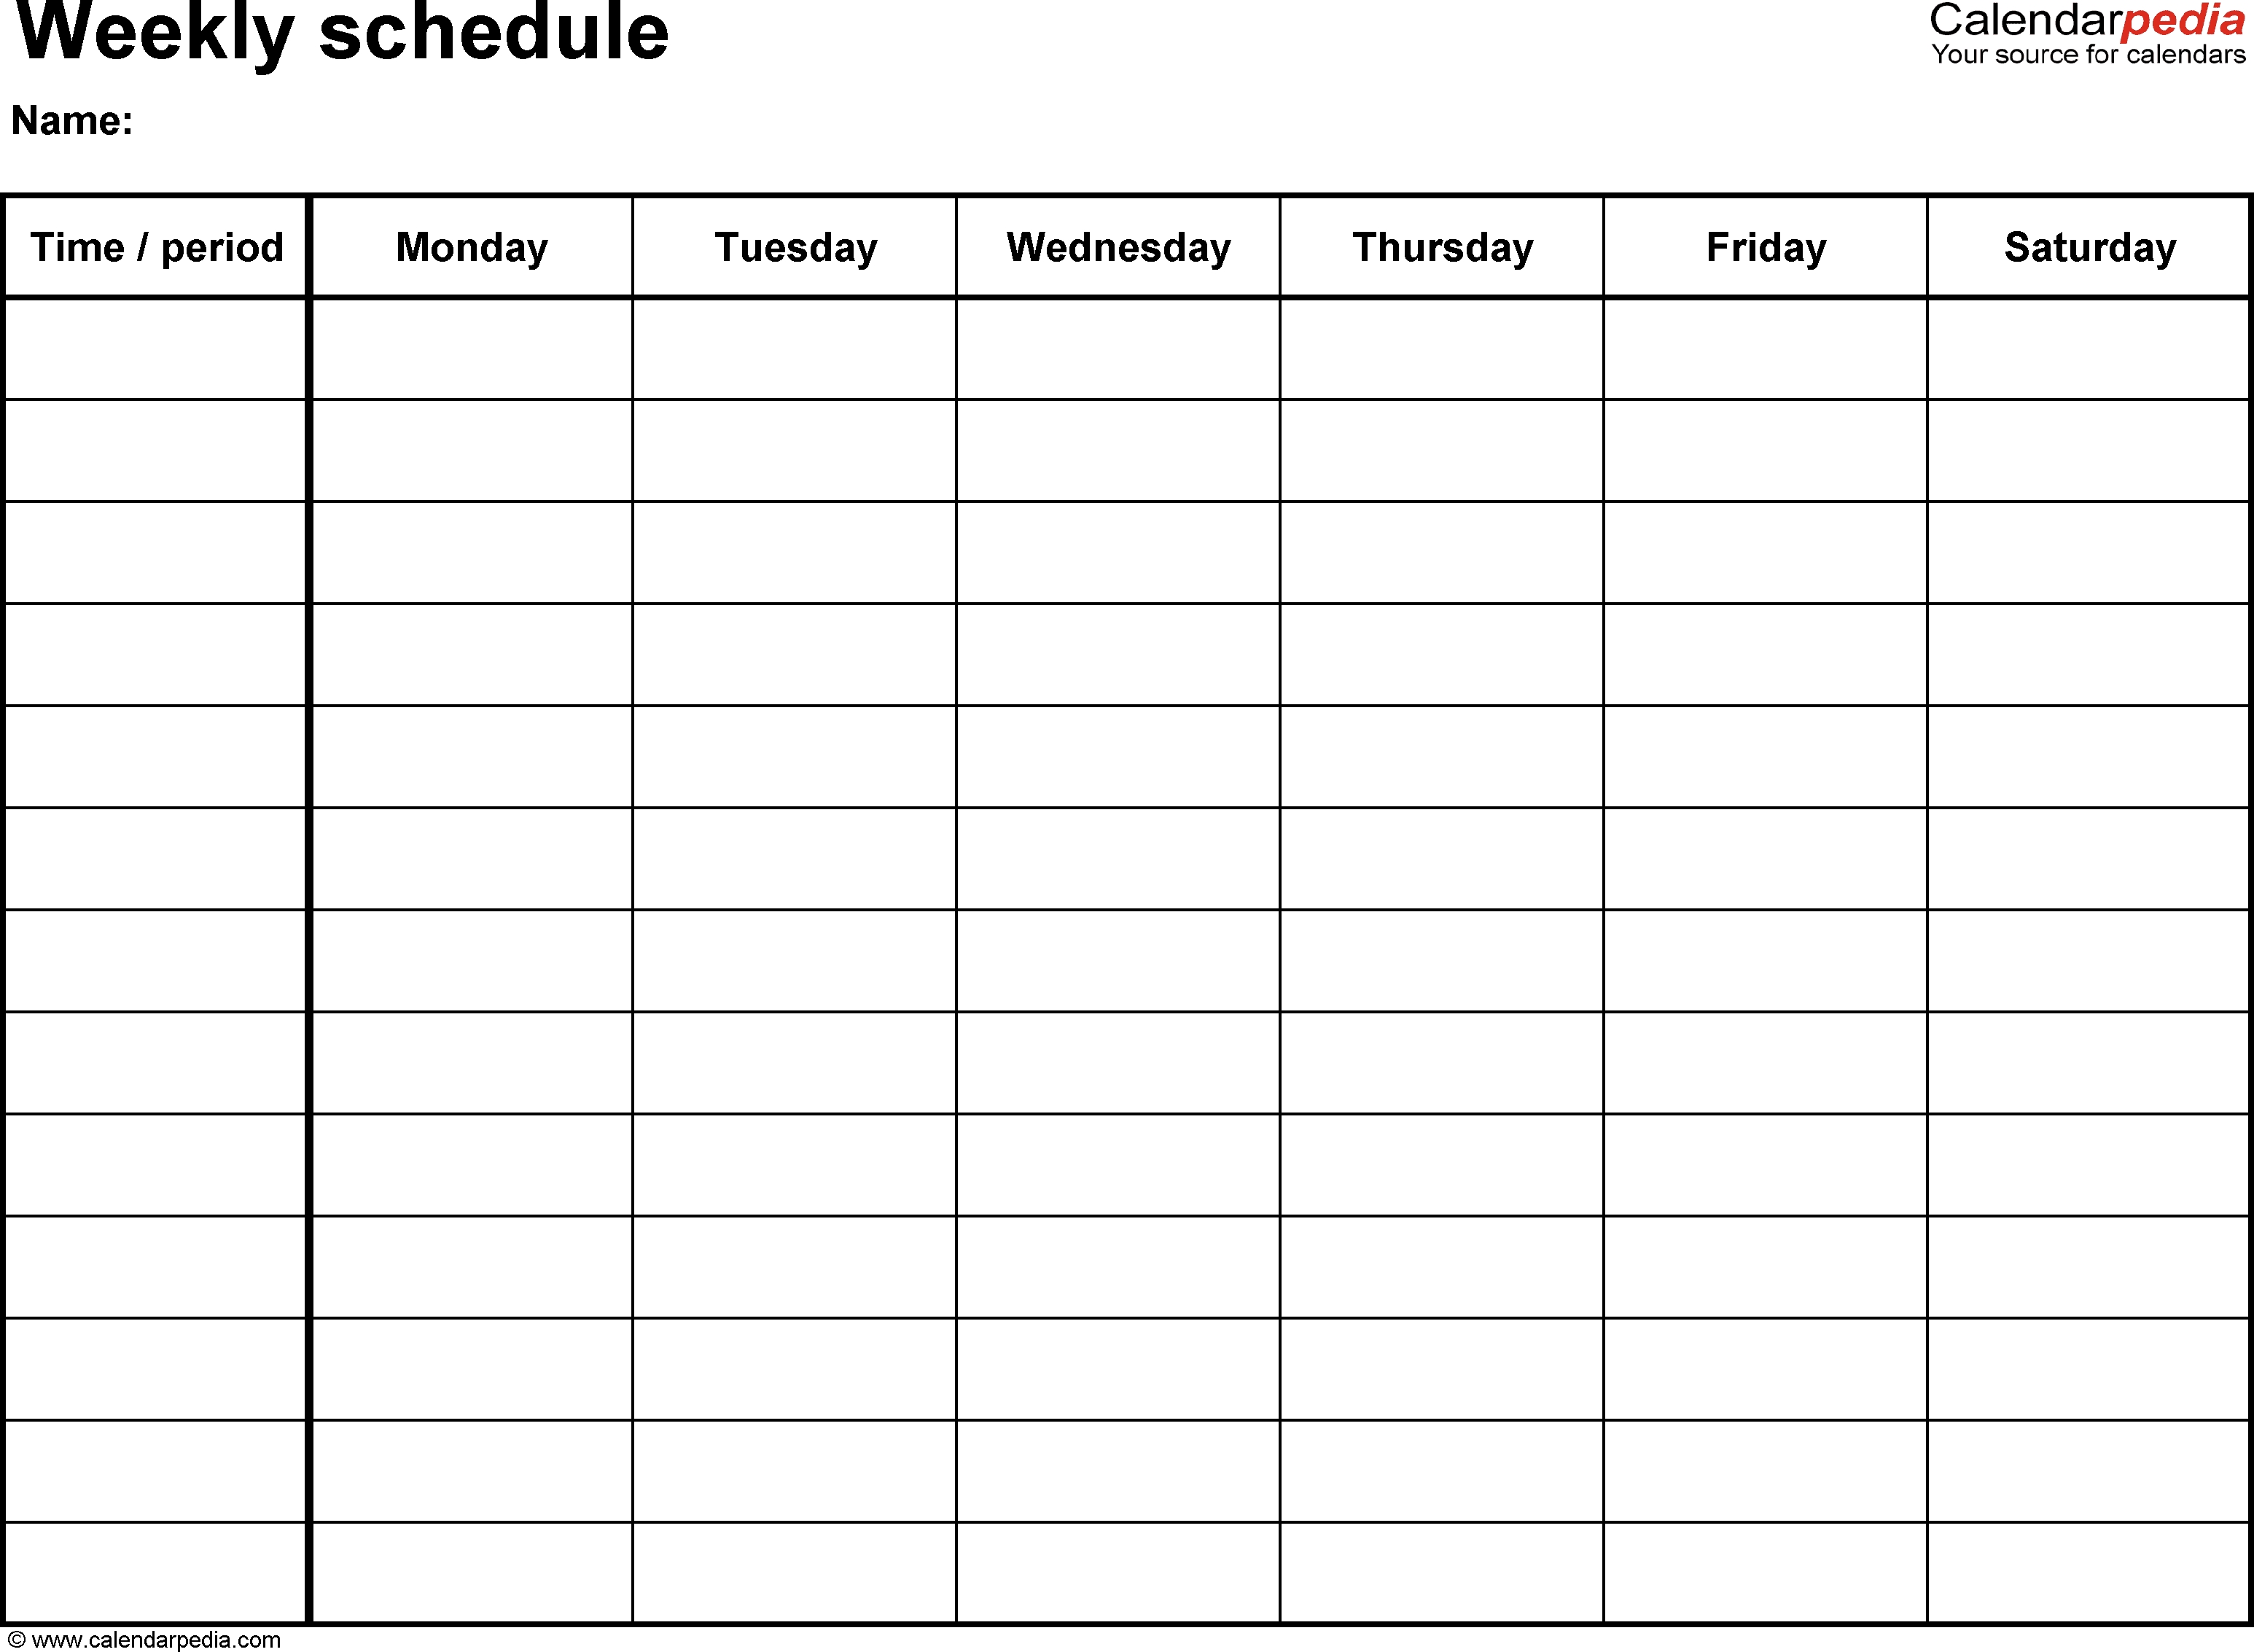 Free Weekly Schedule Templates For Word - 18 Templates  Weekly Schedule Monday - Sunday